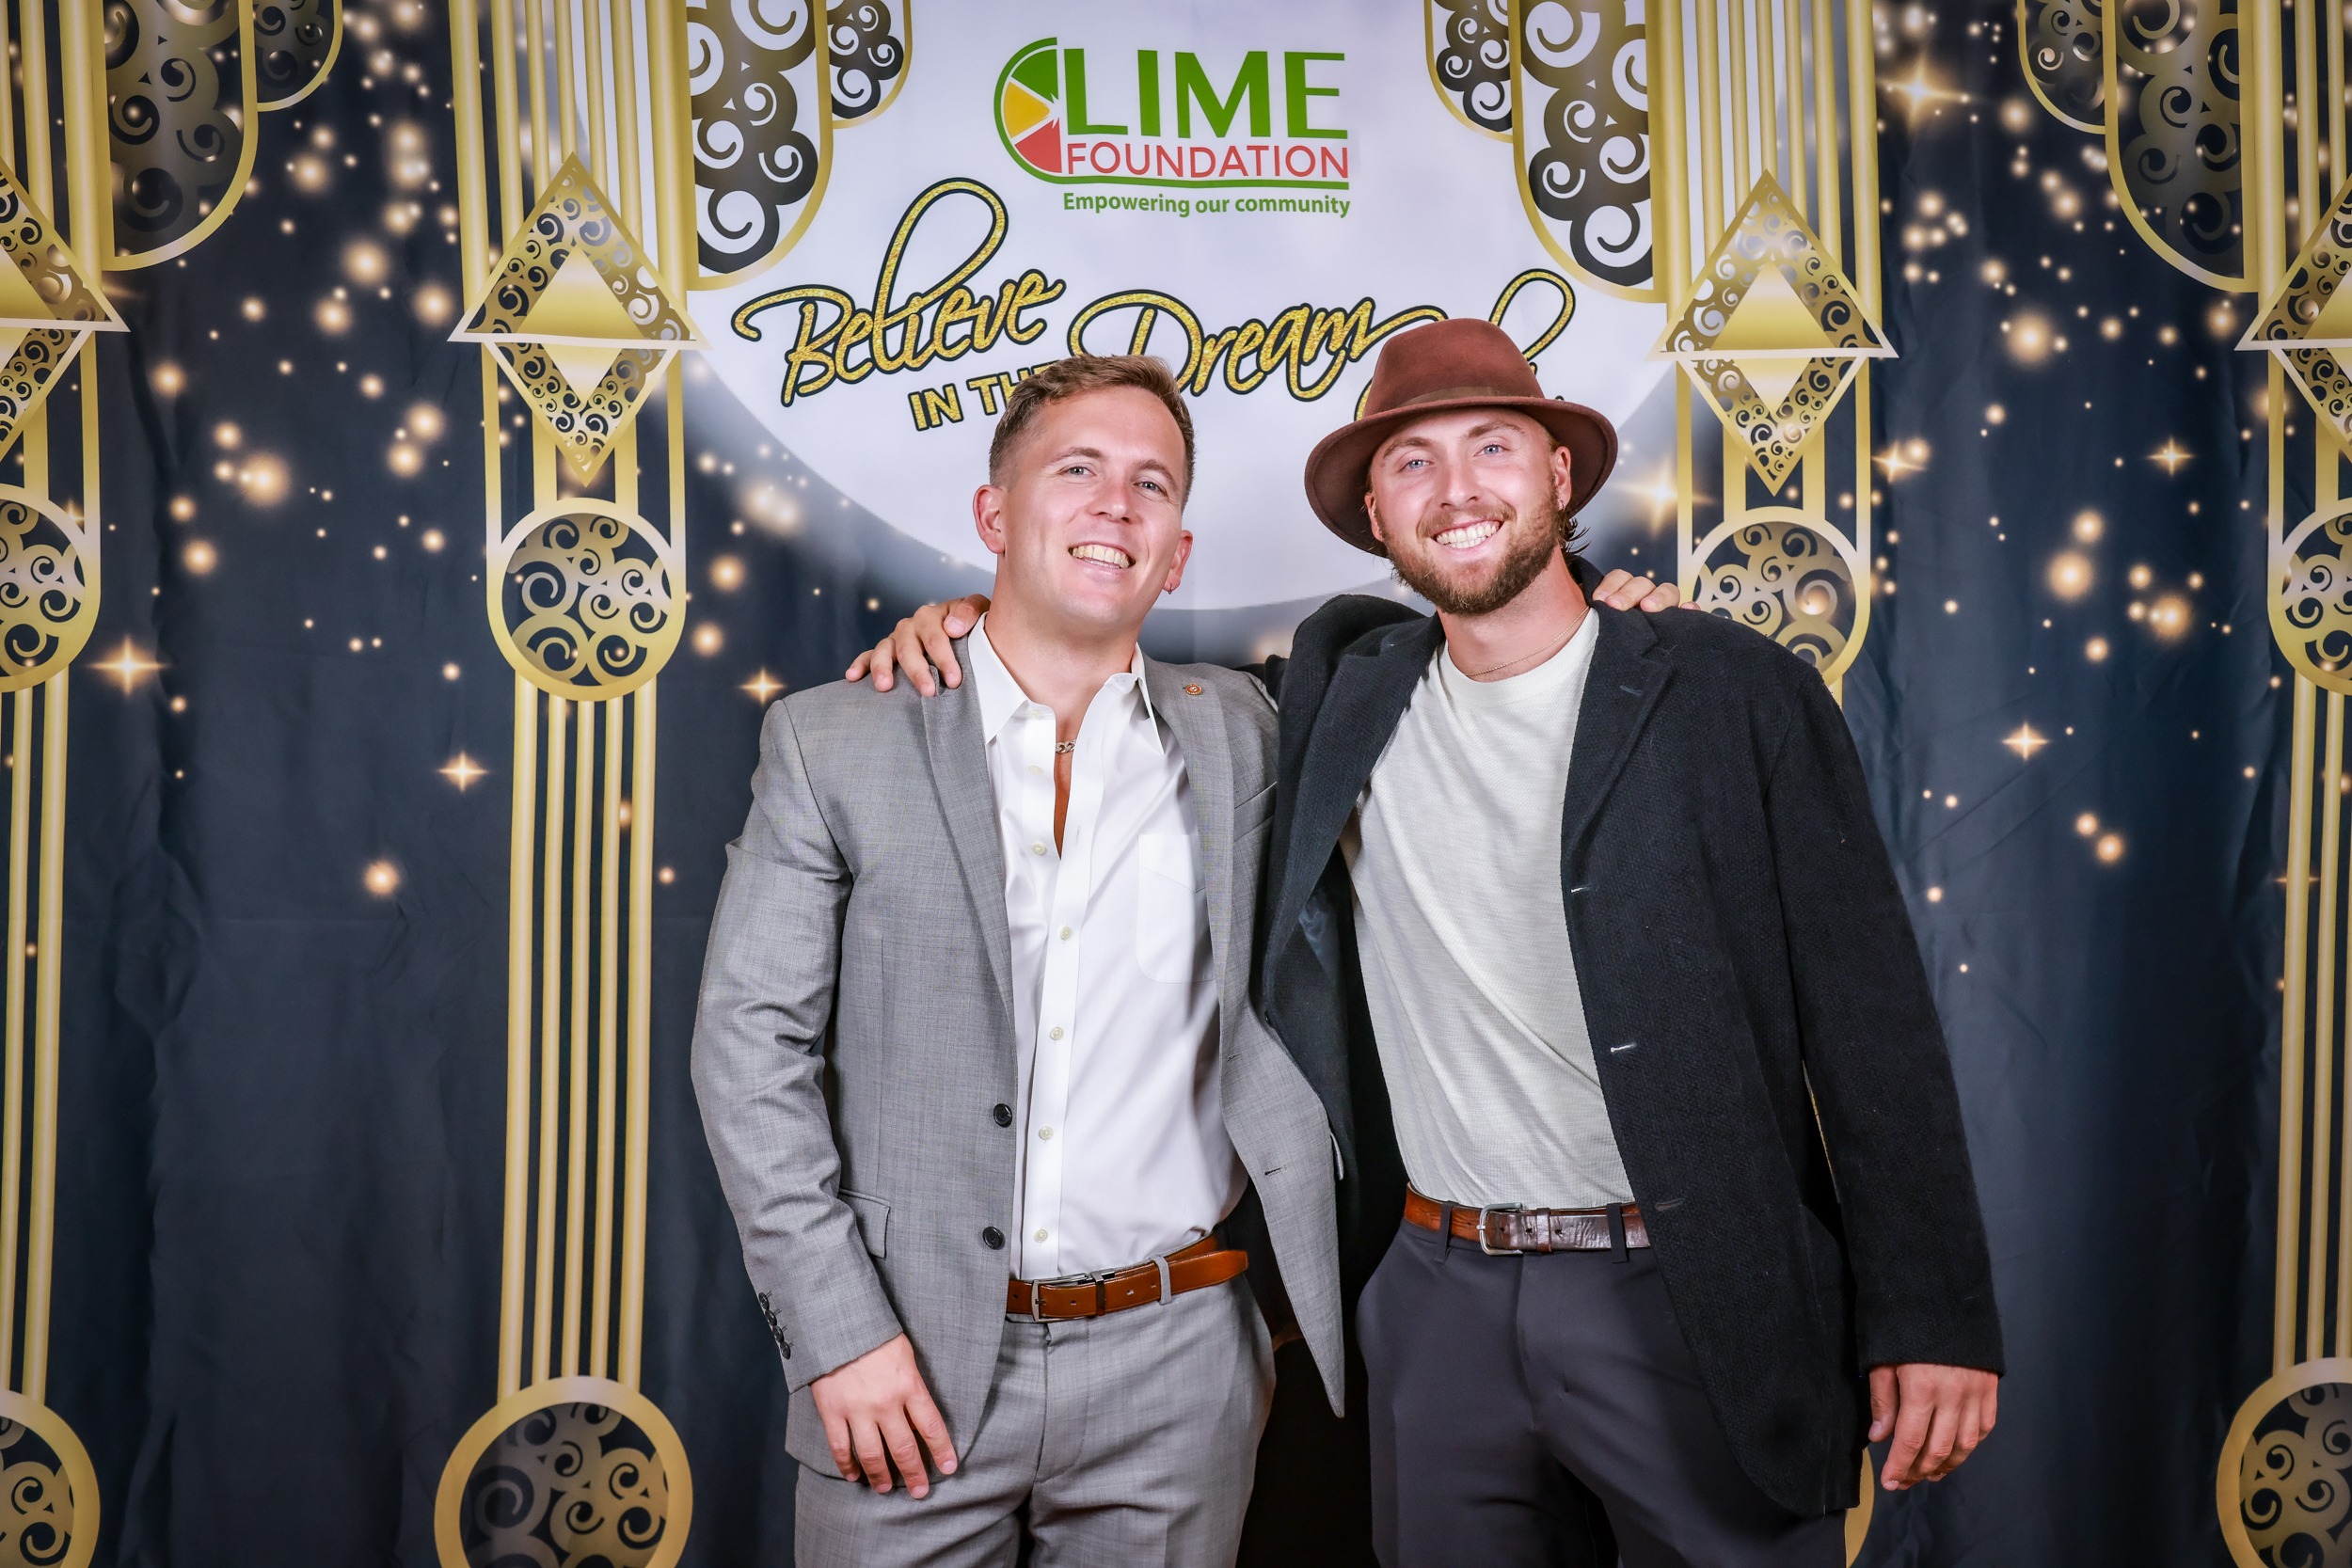 Two men posing for a photo in front of The LIME Foundation backdrop.